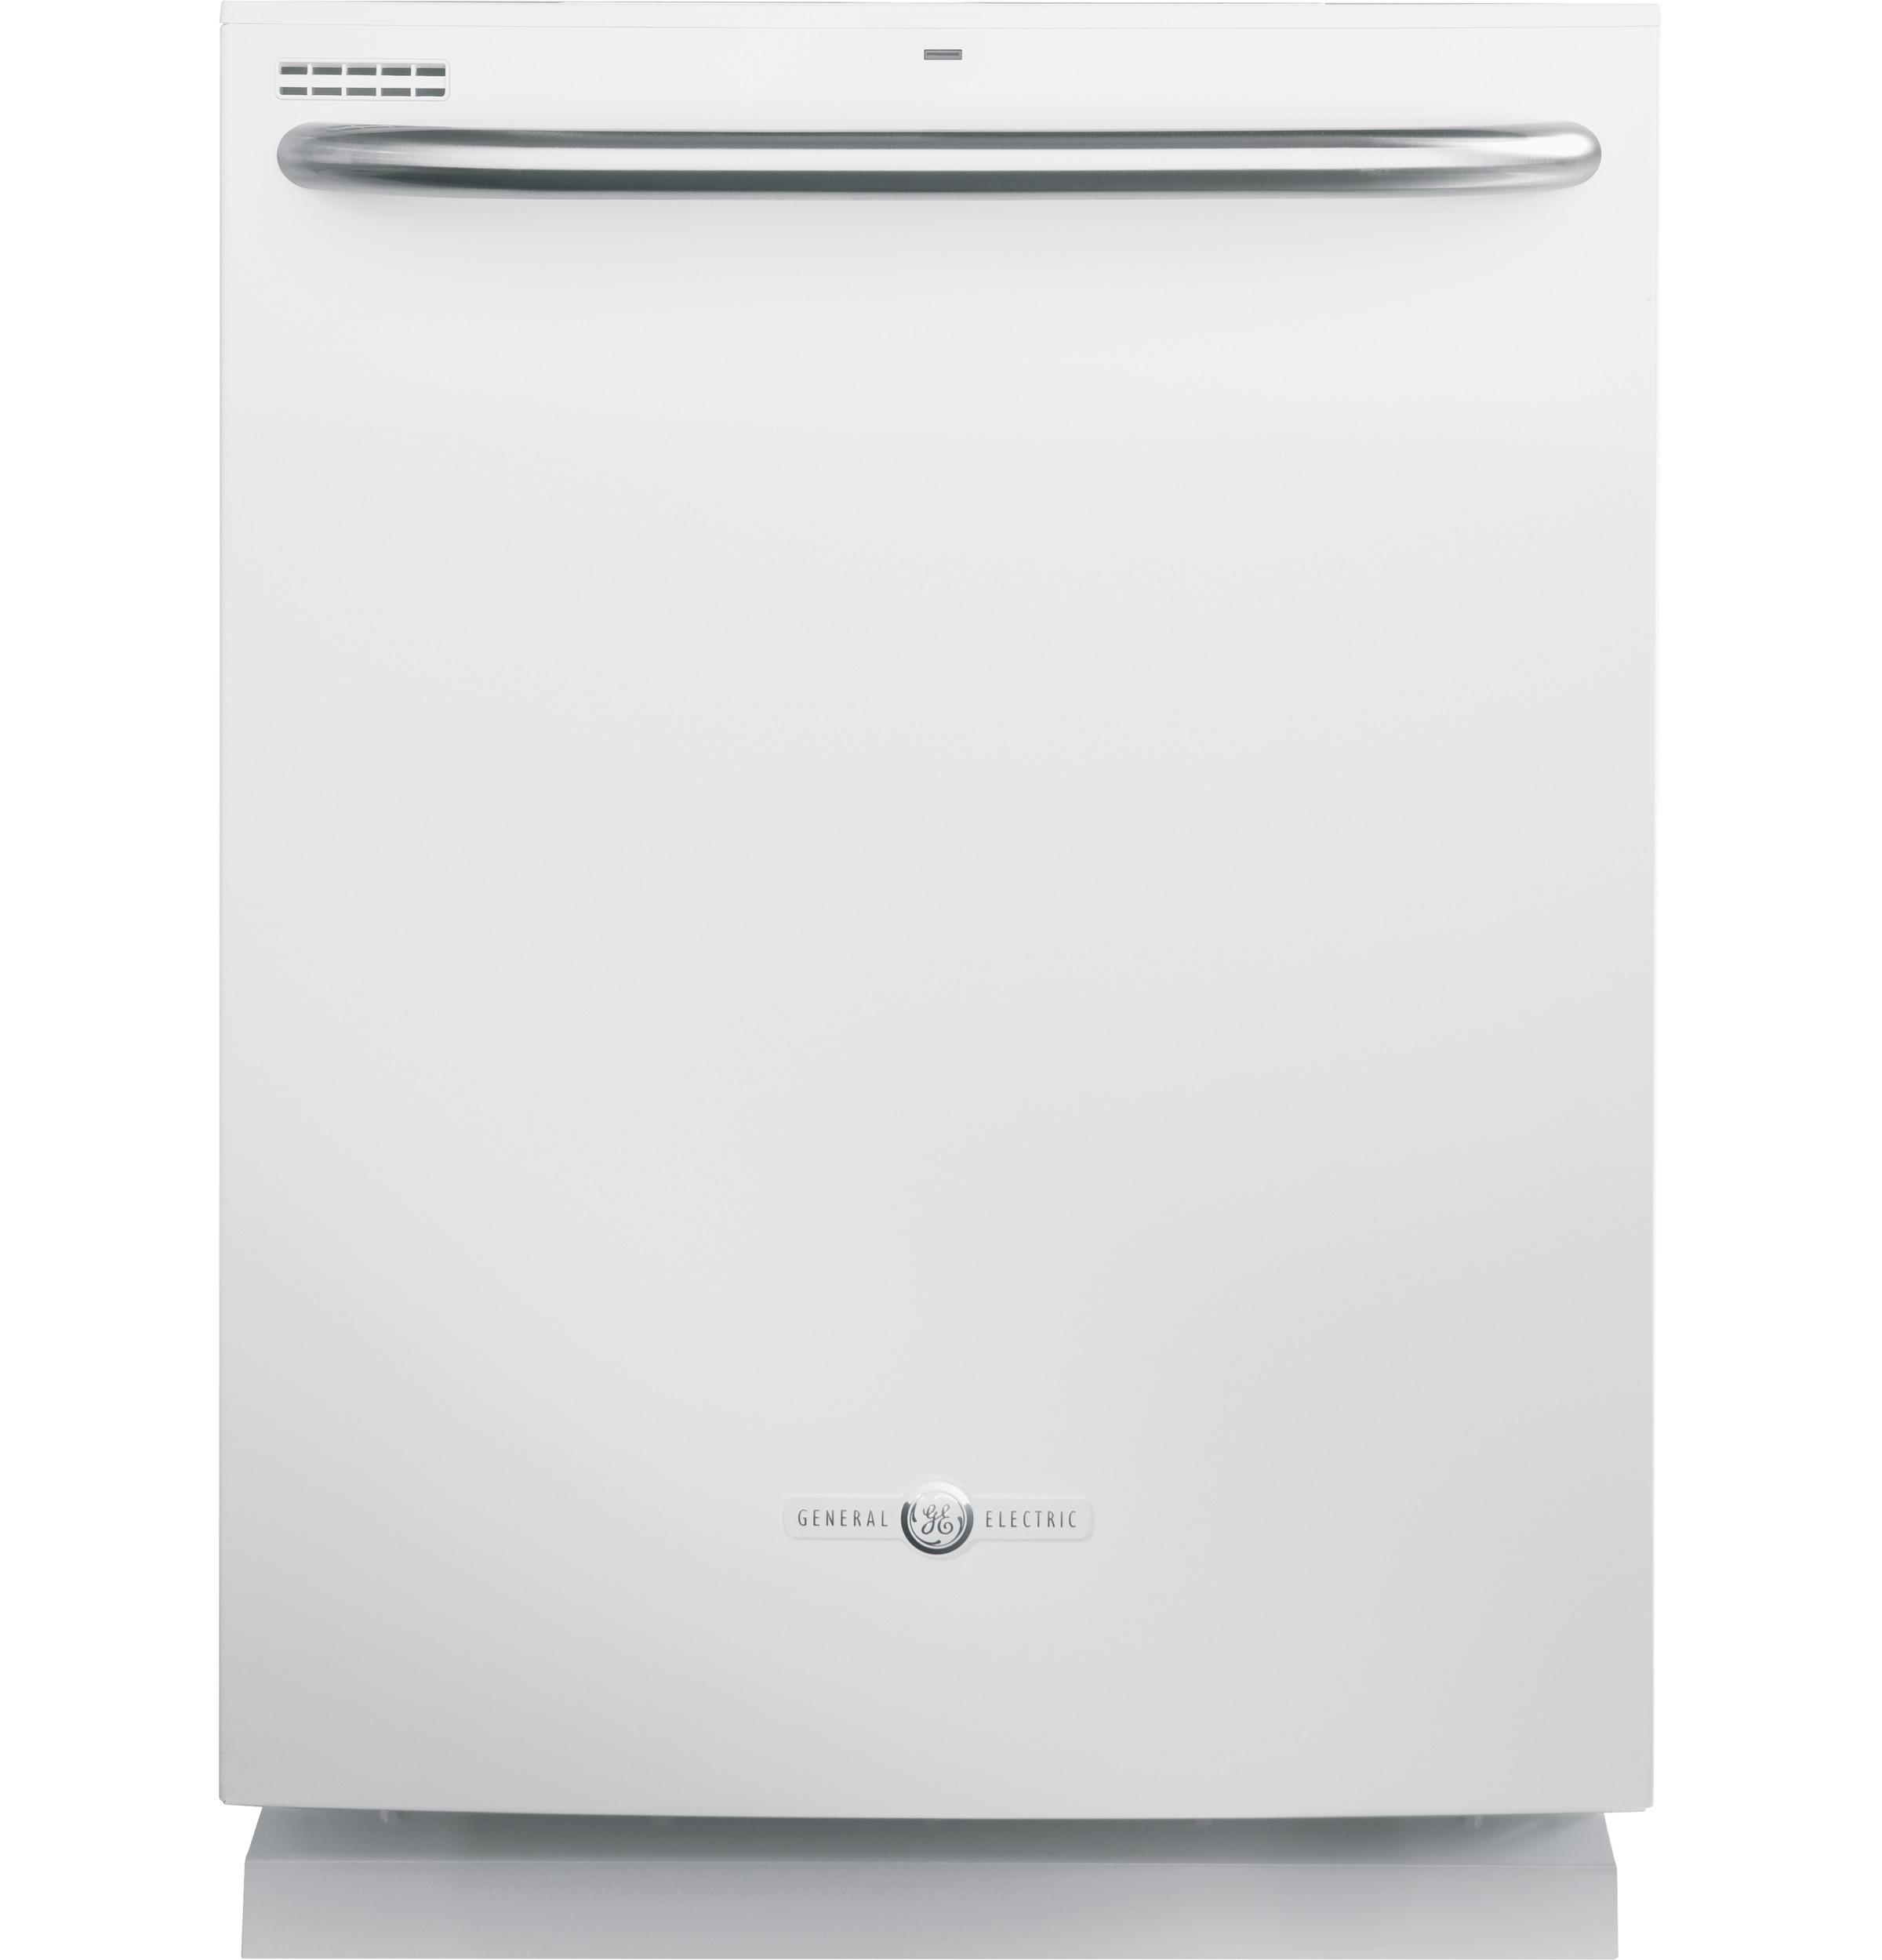 GE Artistry™ Series Dishwasher with Top Controls